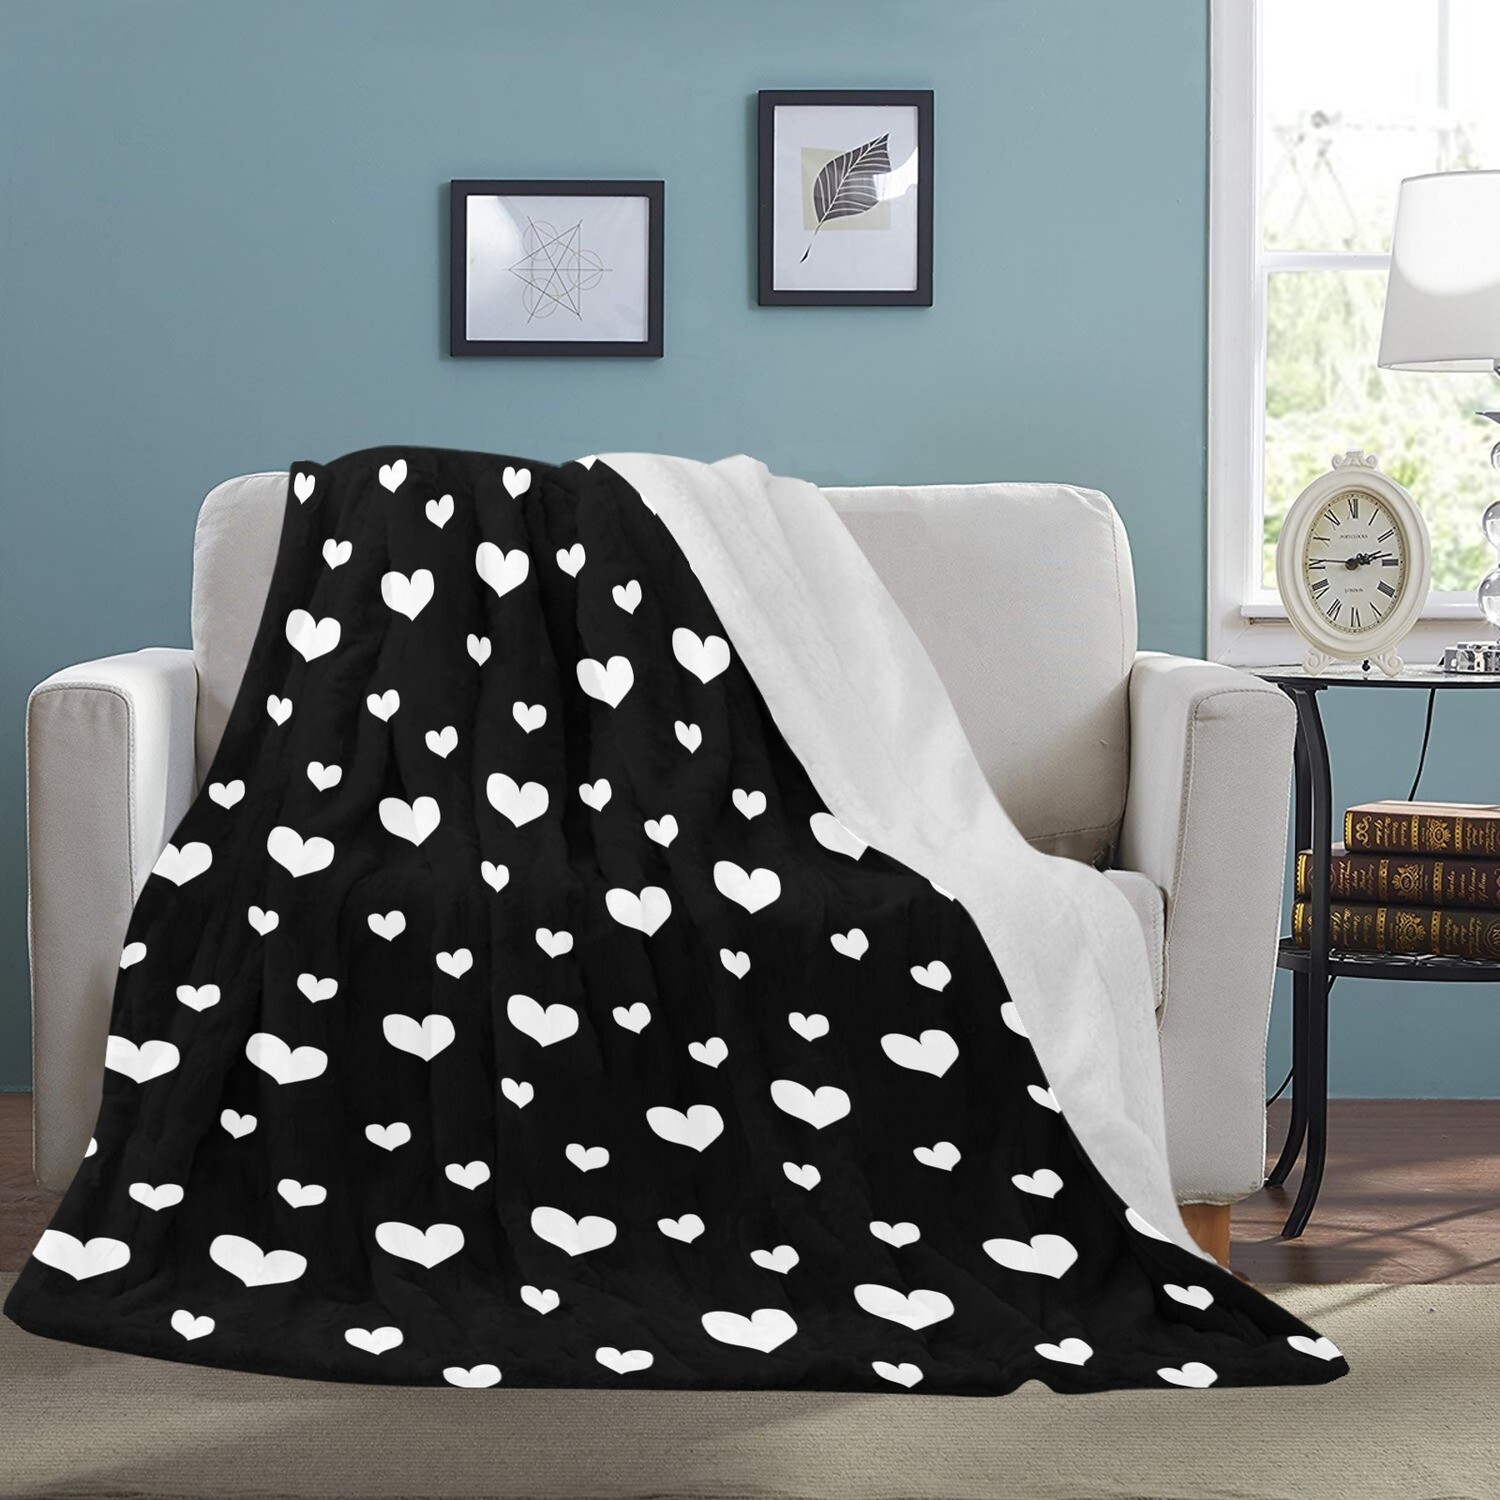 🤴🏽👸🏽💕Large Ultra-Soft Micro Fleece Blanket Valentine white hearts on black, gift, gift for her, gift for him, gift for them, 70"x80"